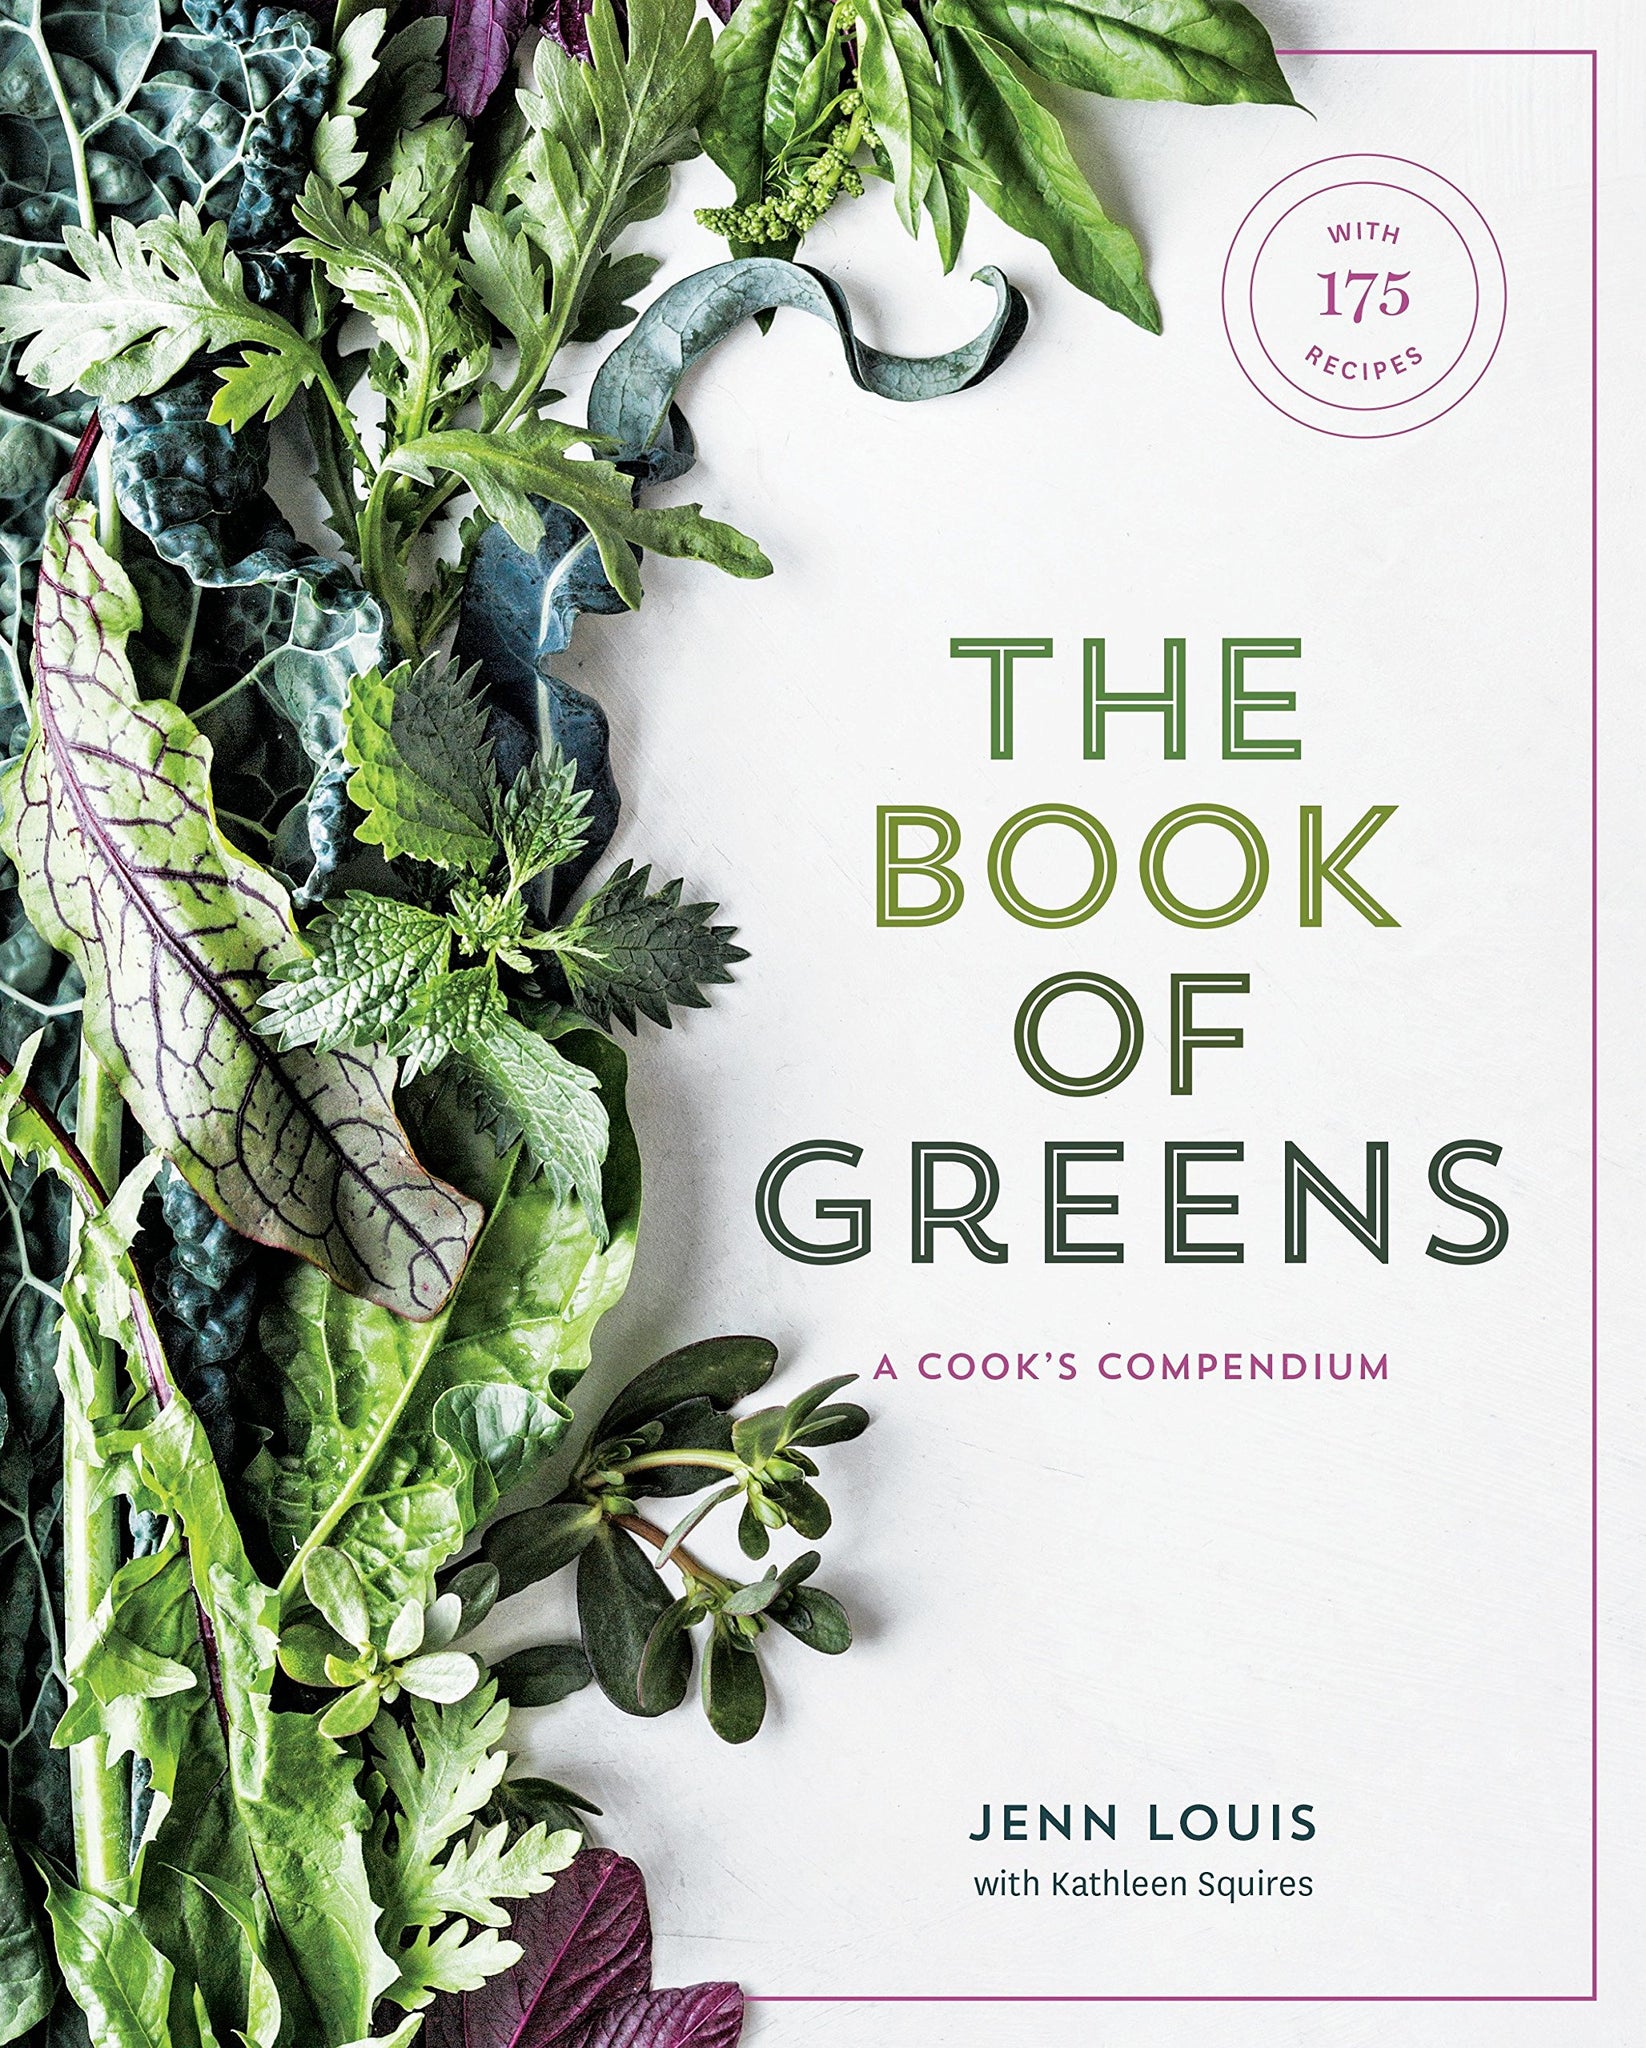 The Book of Greens - Jenn Louis & Kathleen Squires